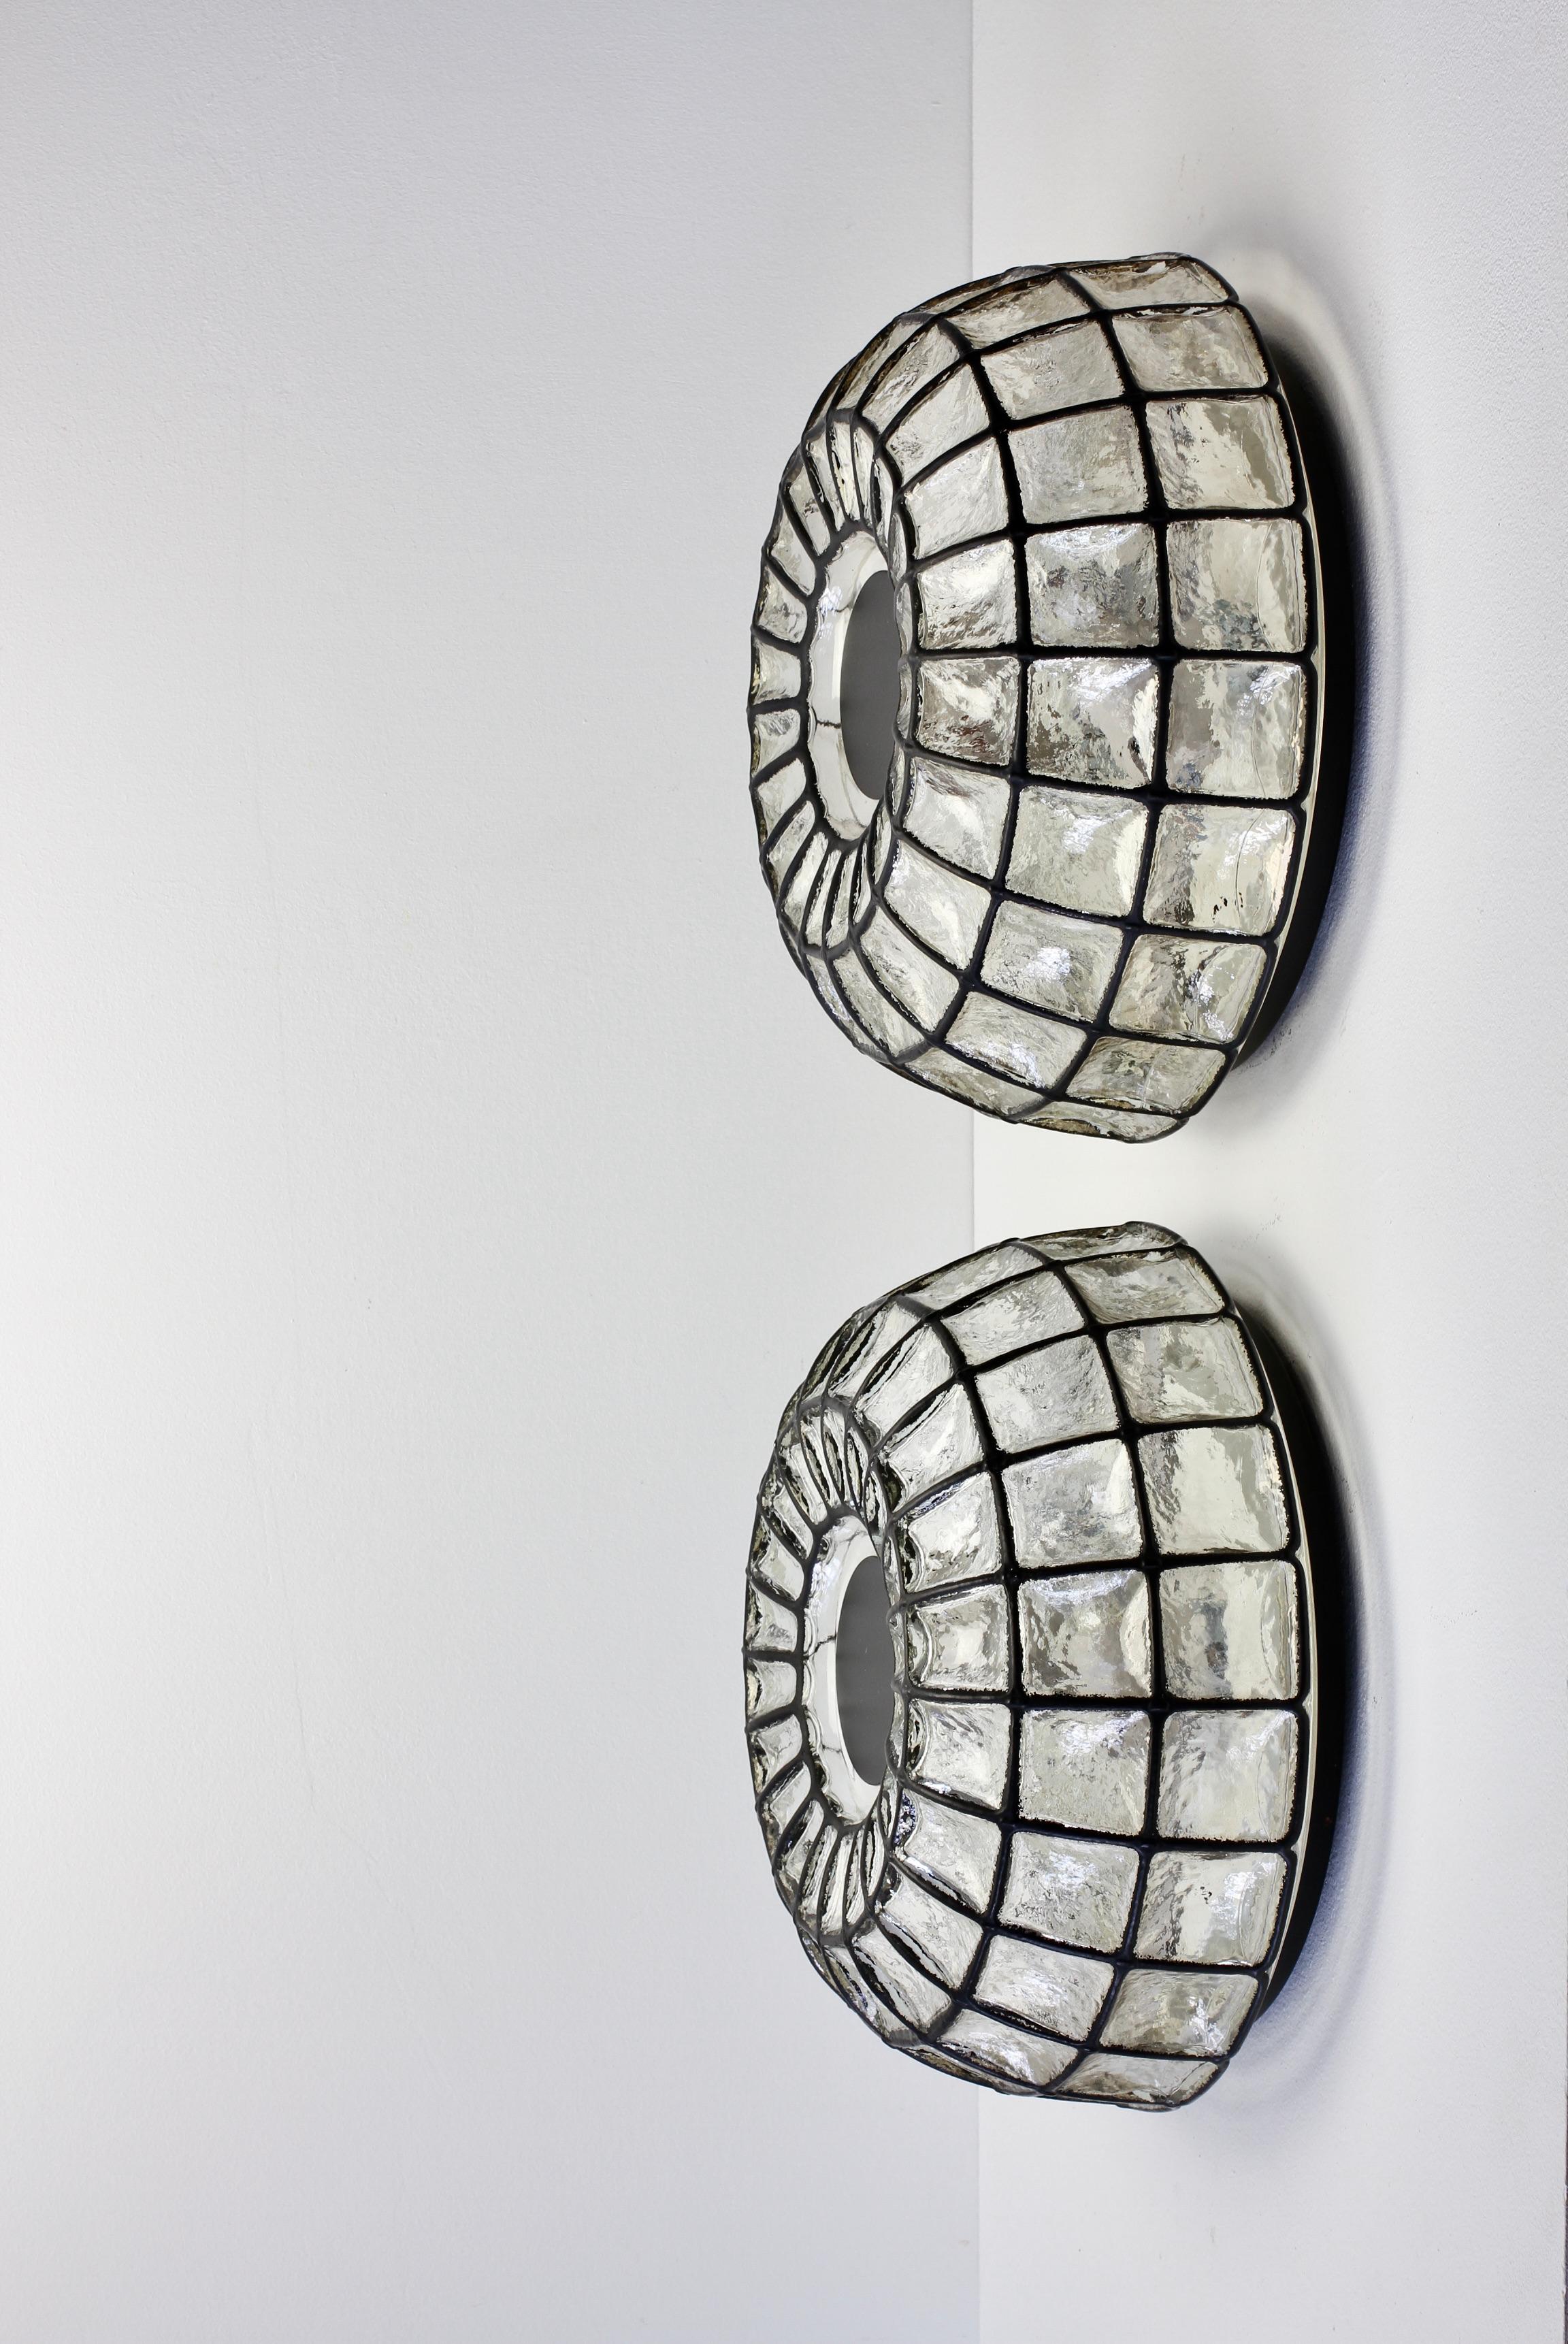 Pair of rare, extra large pair of Mid-Century Modern vintage minimal circular round domed geometric shaped flush mount wall or ceiling light / lamp fixtures by Glashütte Limburg, Germany, circa 1965. The honeycombed bubble glass bulges slightly